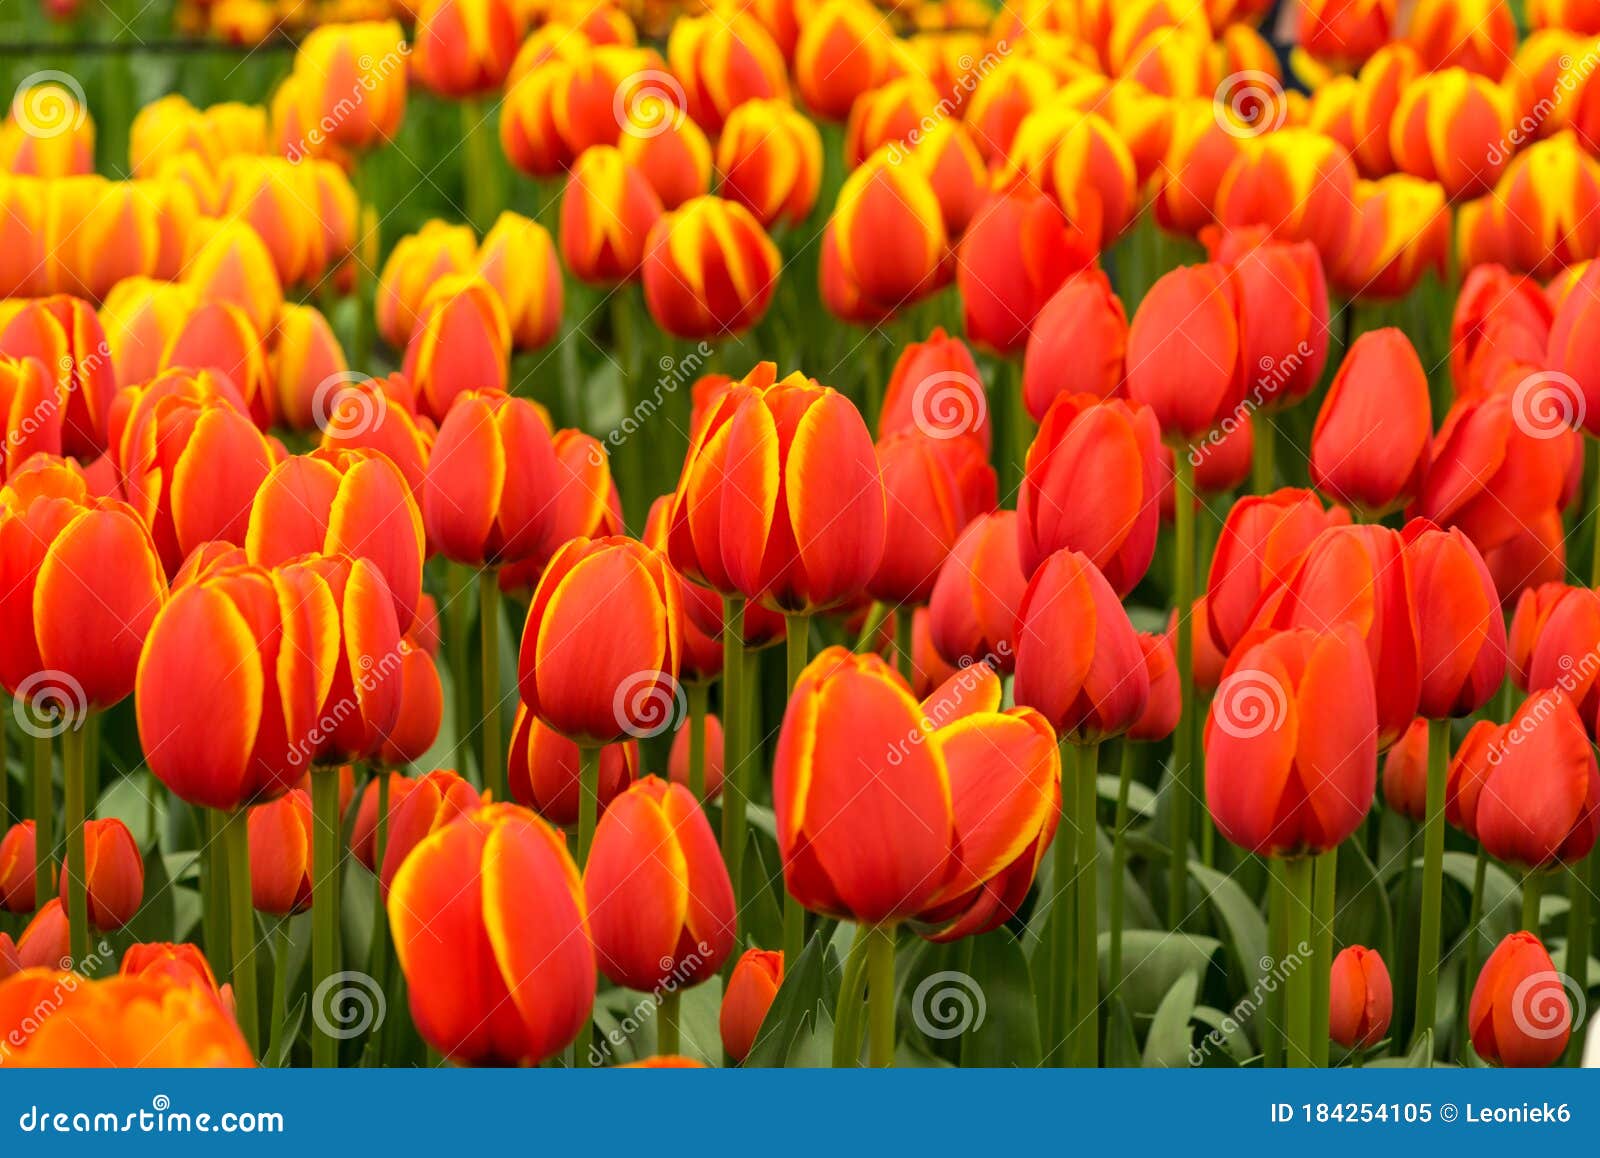 Field of Red and Yellow Tulips with Other Tulips in the Background on a ...